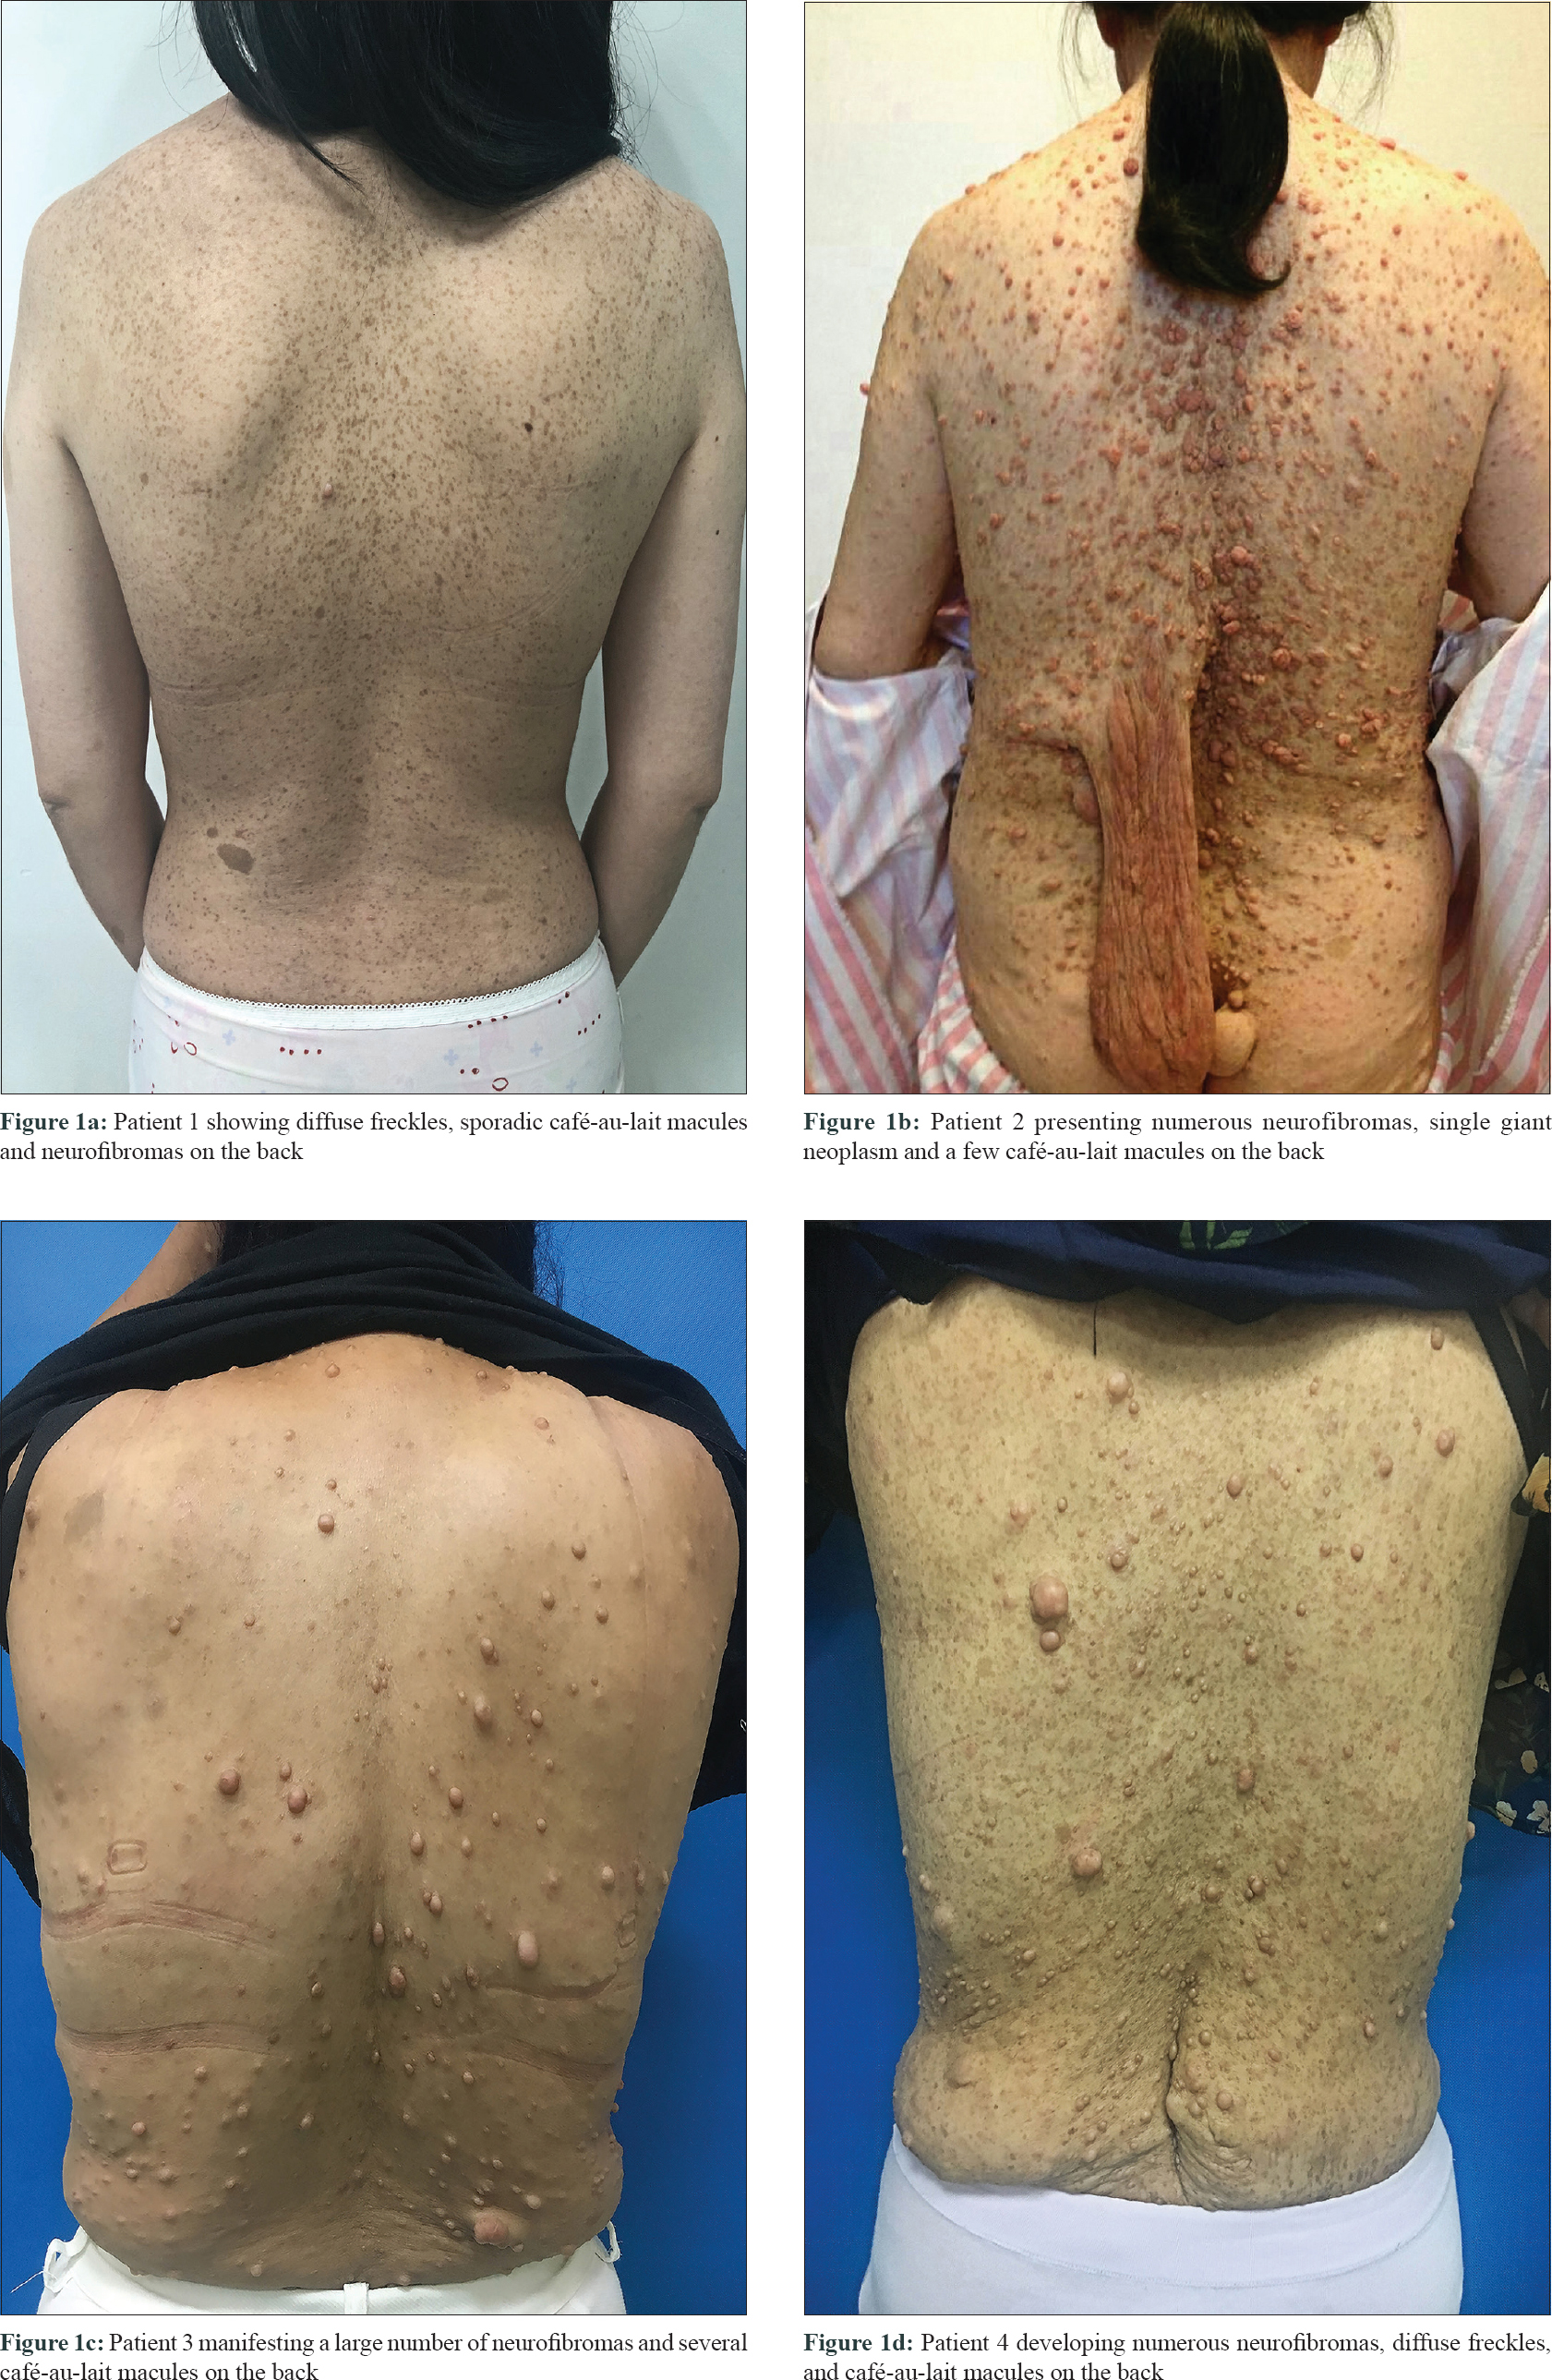 Two Novel Mutations Of Nf1 Gene Identified In Chinese Patients With Severe Neurofibromatosis Type 1 Indian Journal Of Dermatology Venereology And Leprology